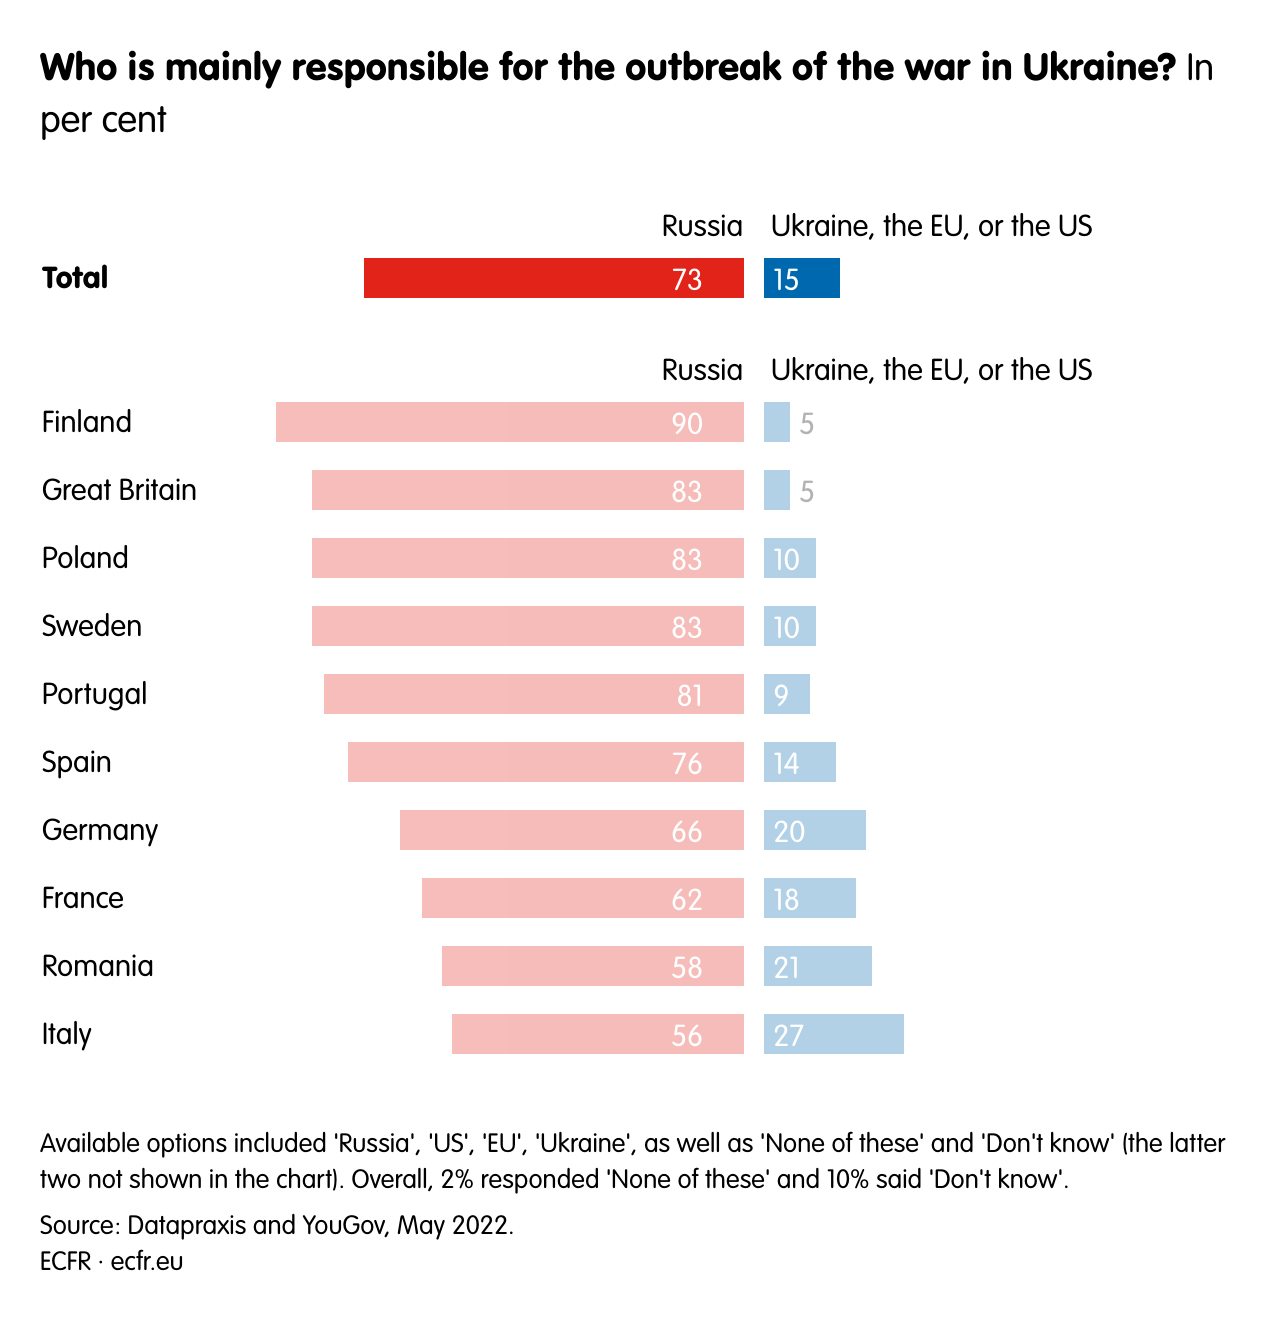 Who is mainly responsible for the outbreak of the war in Ukraine?